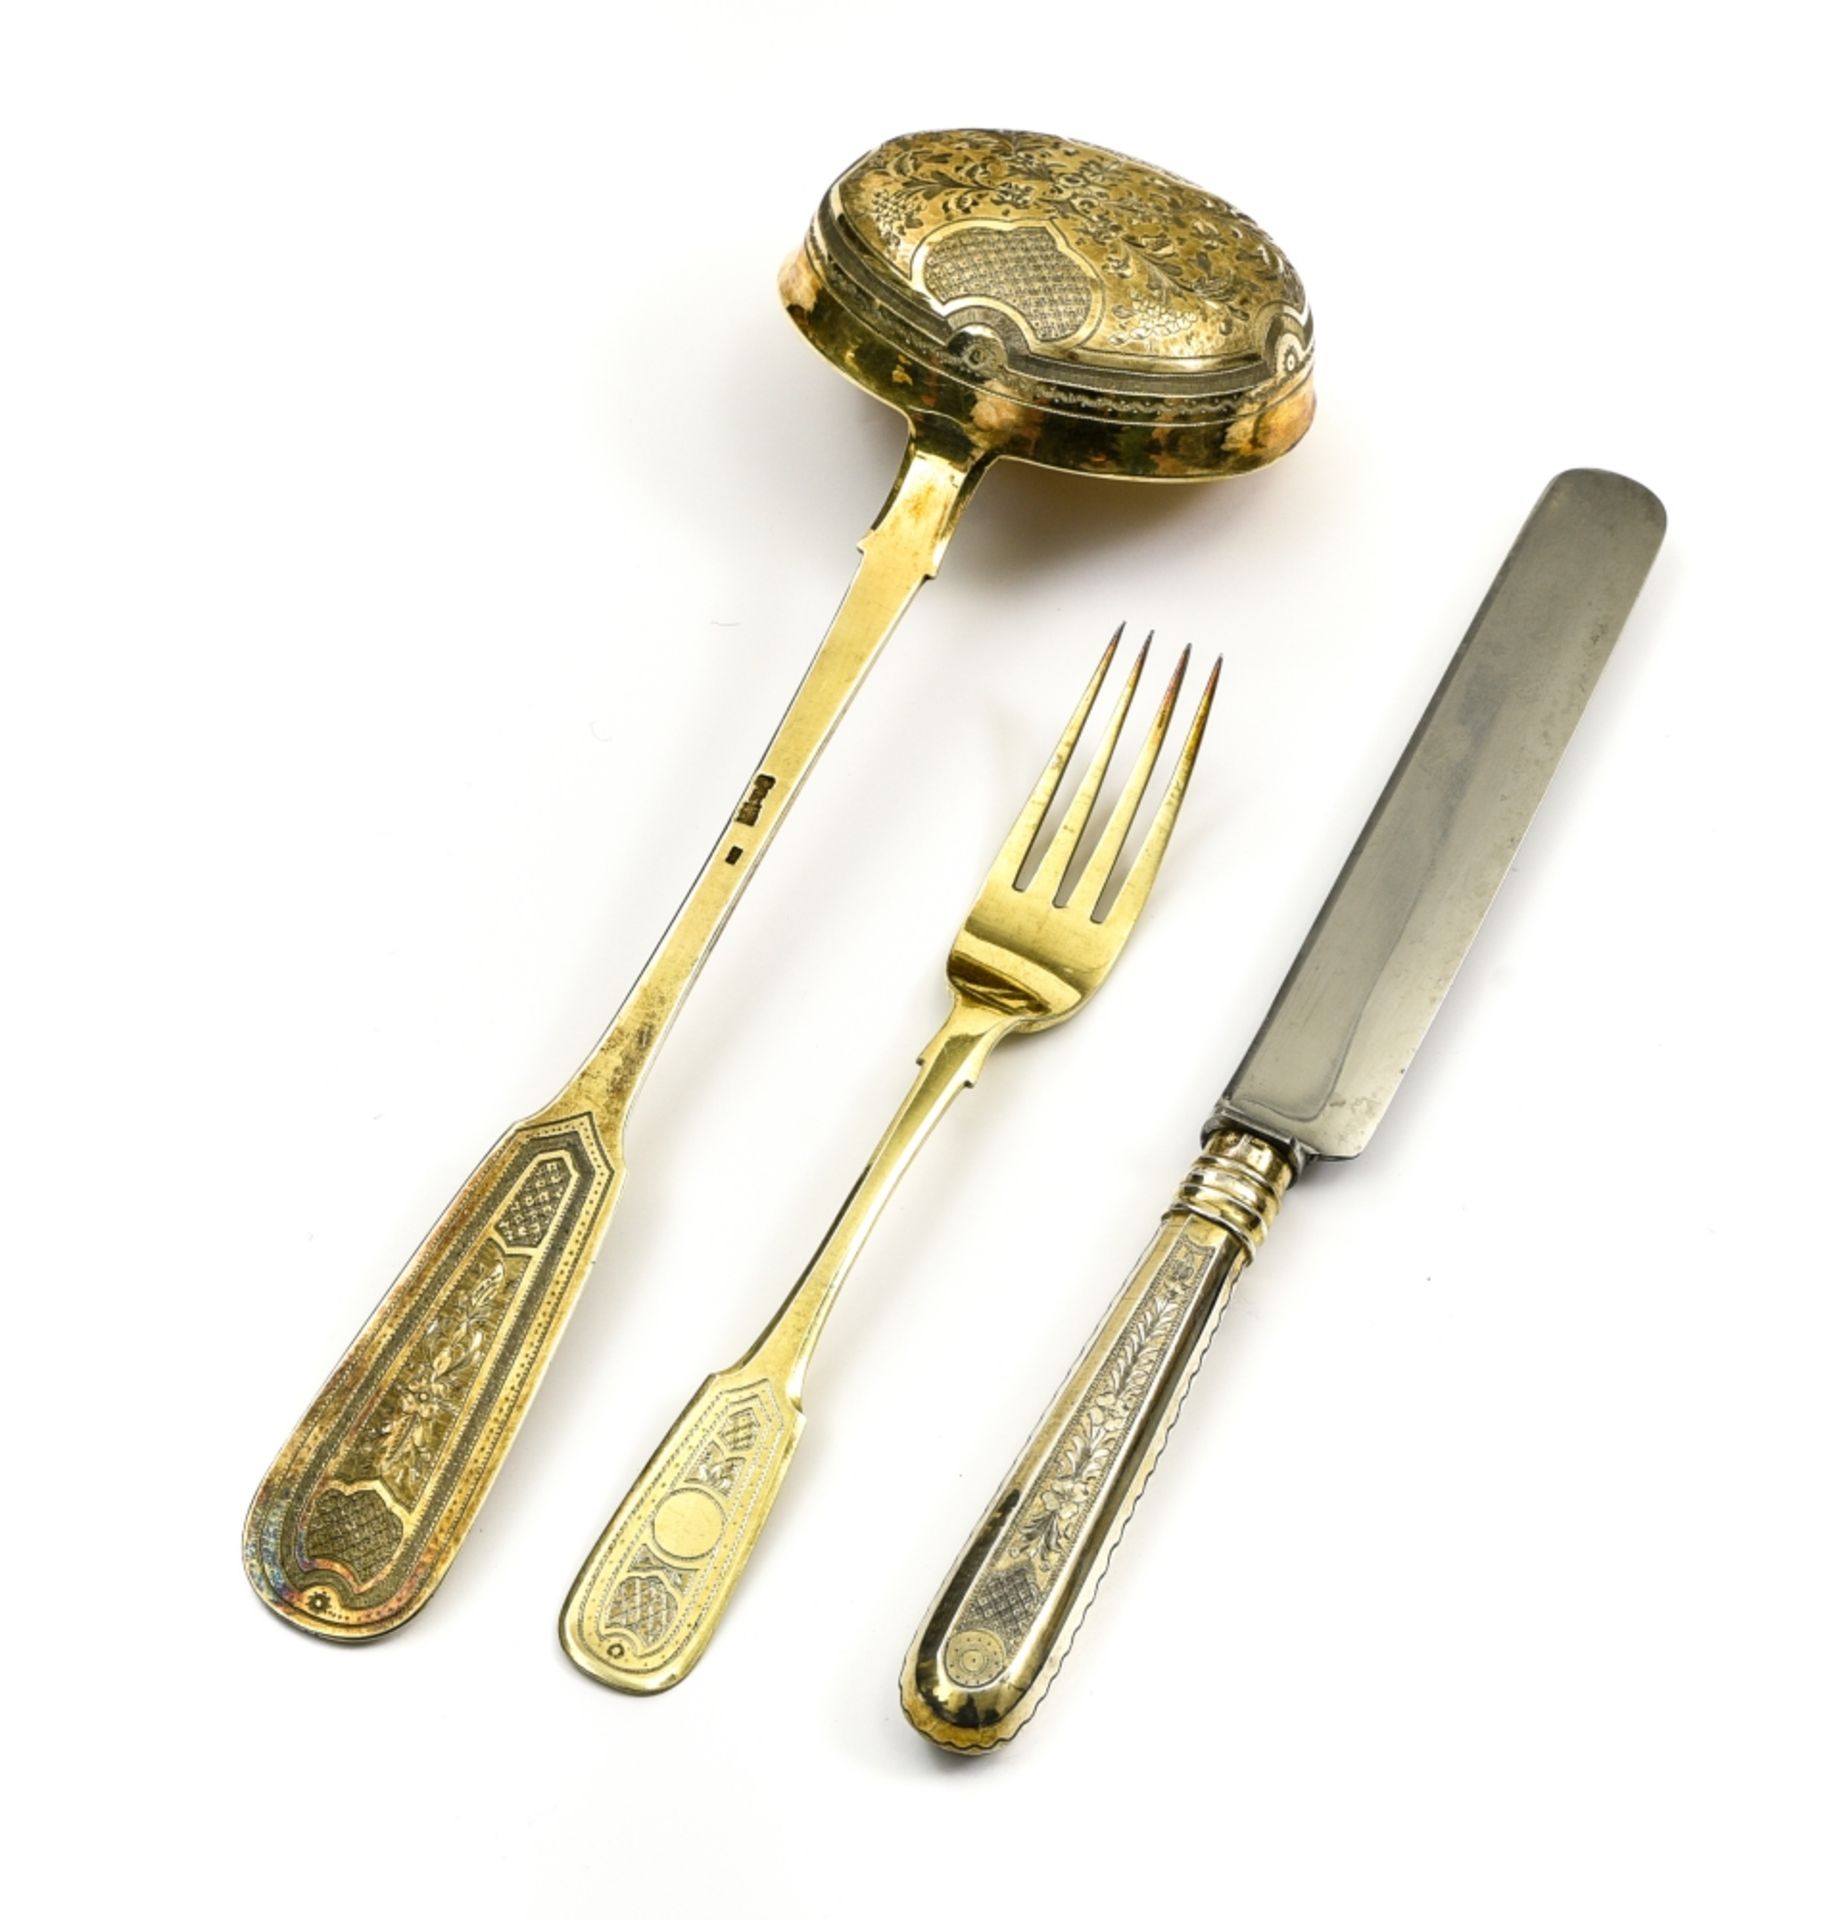 Part of a cutlery set MOSCOW, 1878 vermeil with engraved decor, composed of 12 forks, 11 knives, and - Image 2 of 4